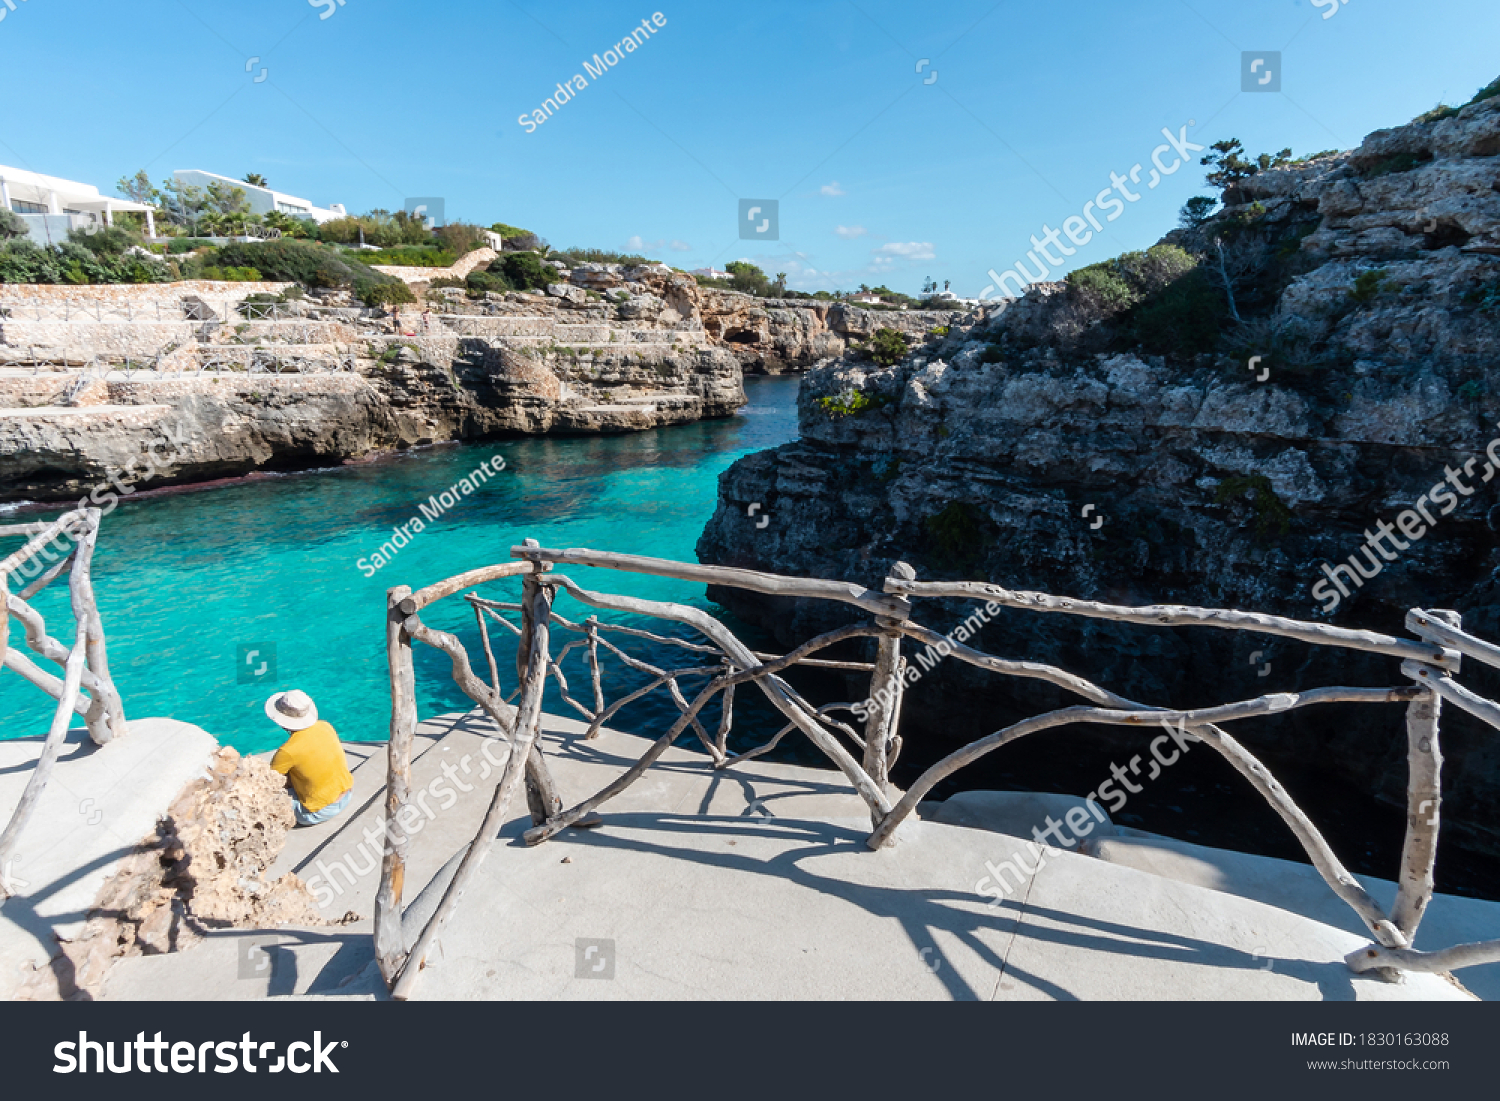 Turquoise waters of Cala en Brut, beach of Minorca, with a man with hat contemplating the view, Balearic Islands in Spain #1830163088